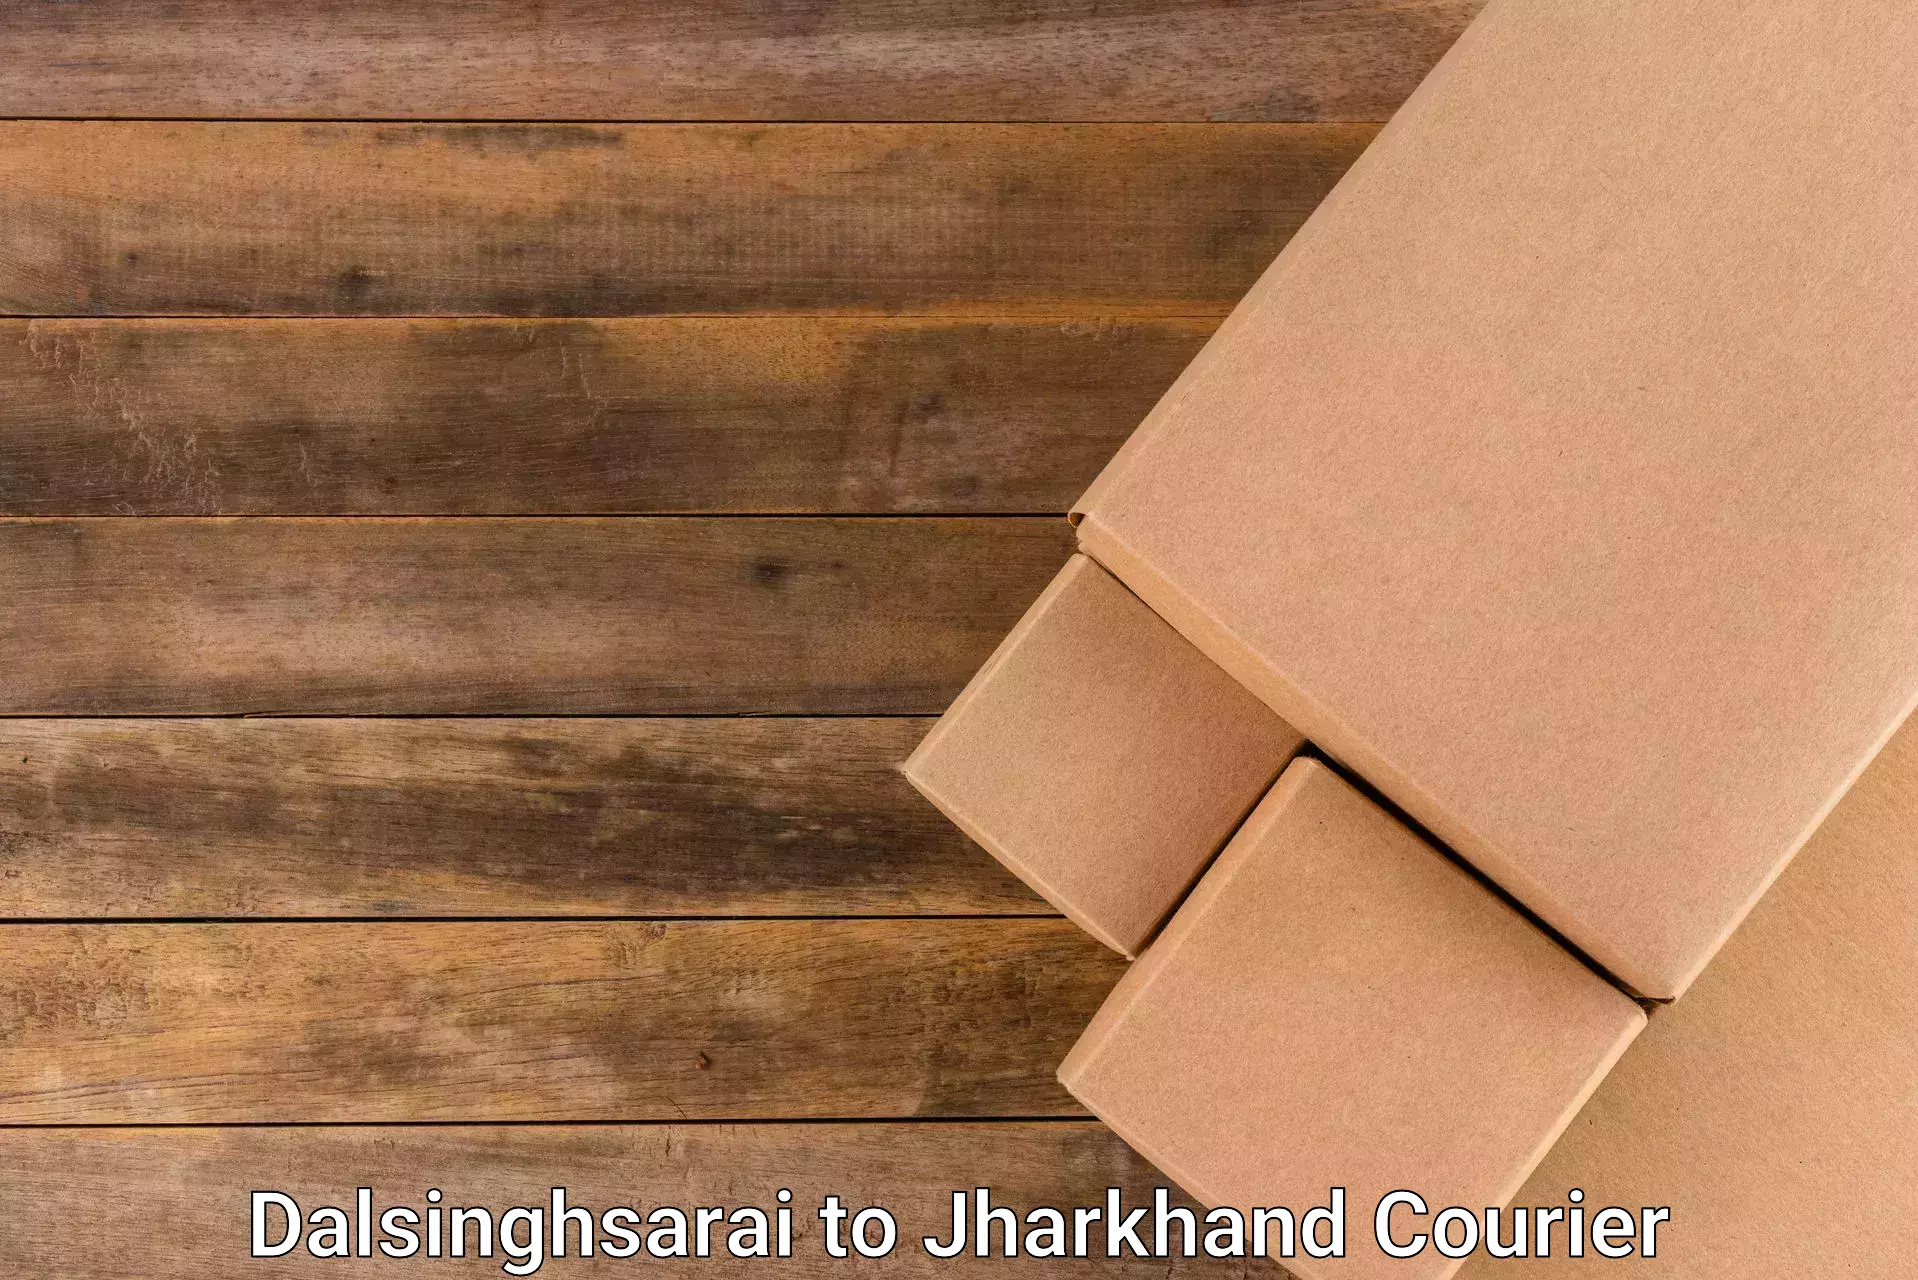 Tailored shipping plans Dalsinghsarai to IIT Dhanbad